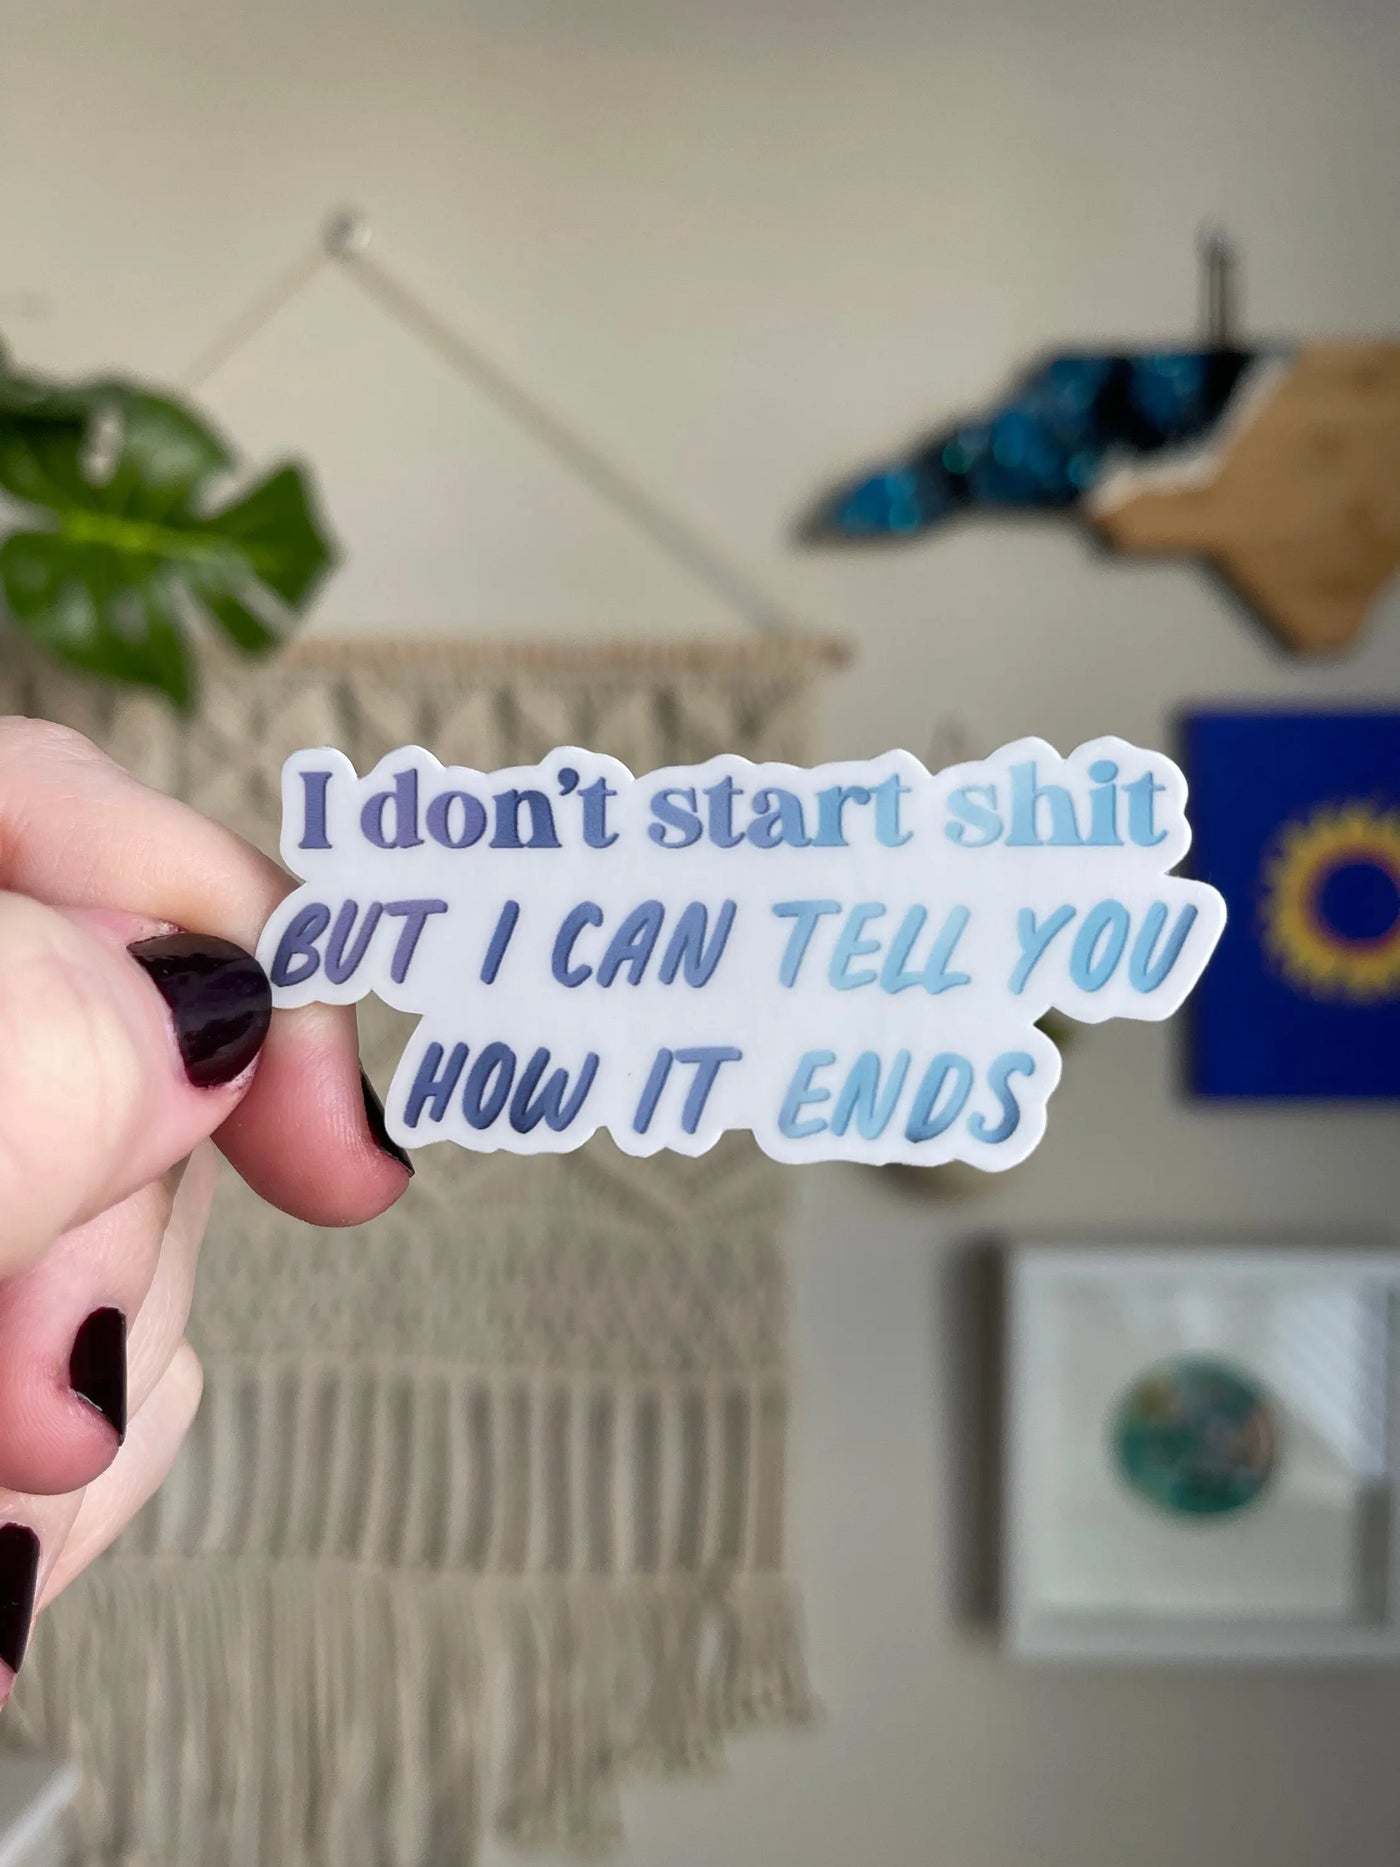 I don’t start shit but I can tell you how it ends sticker MangoIllustrated